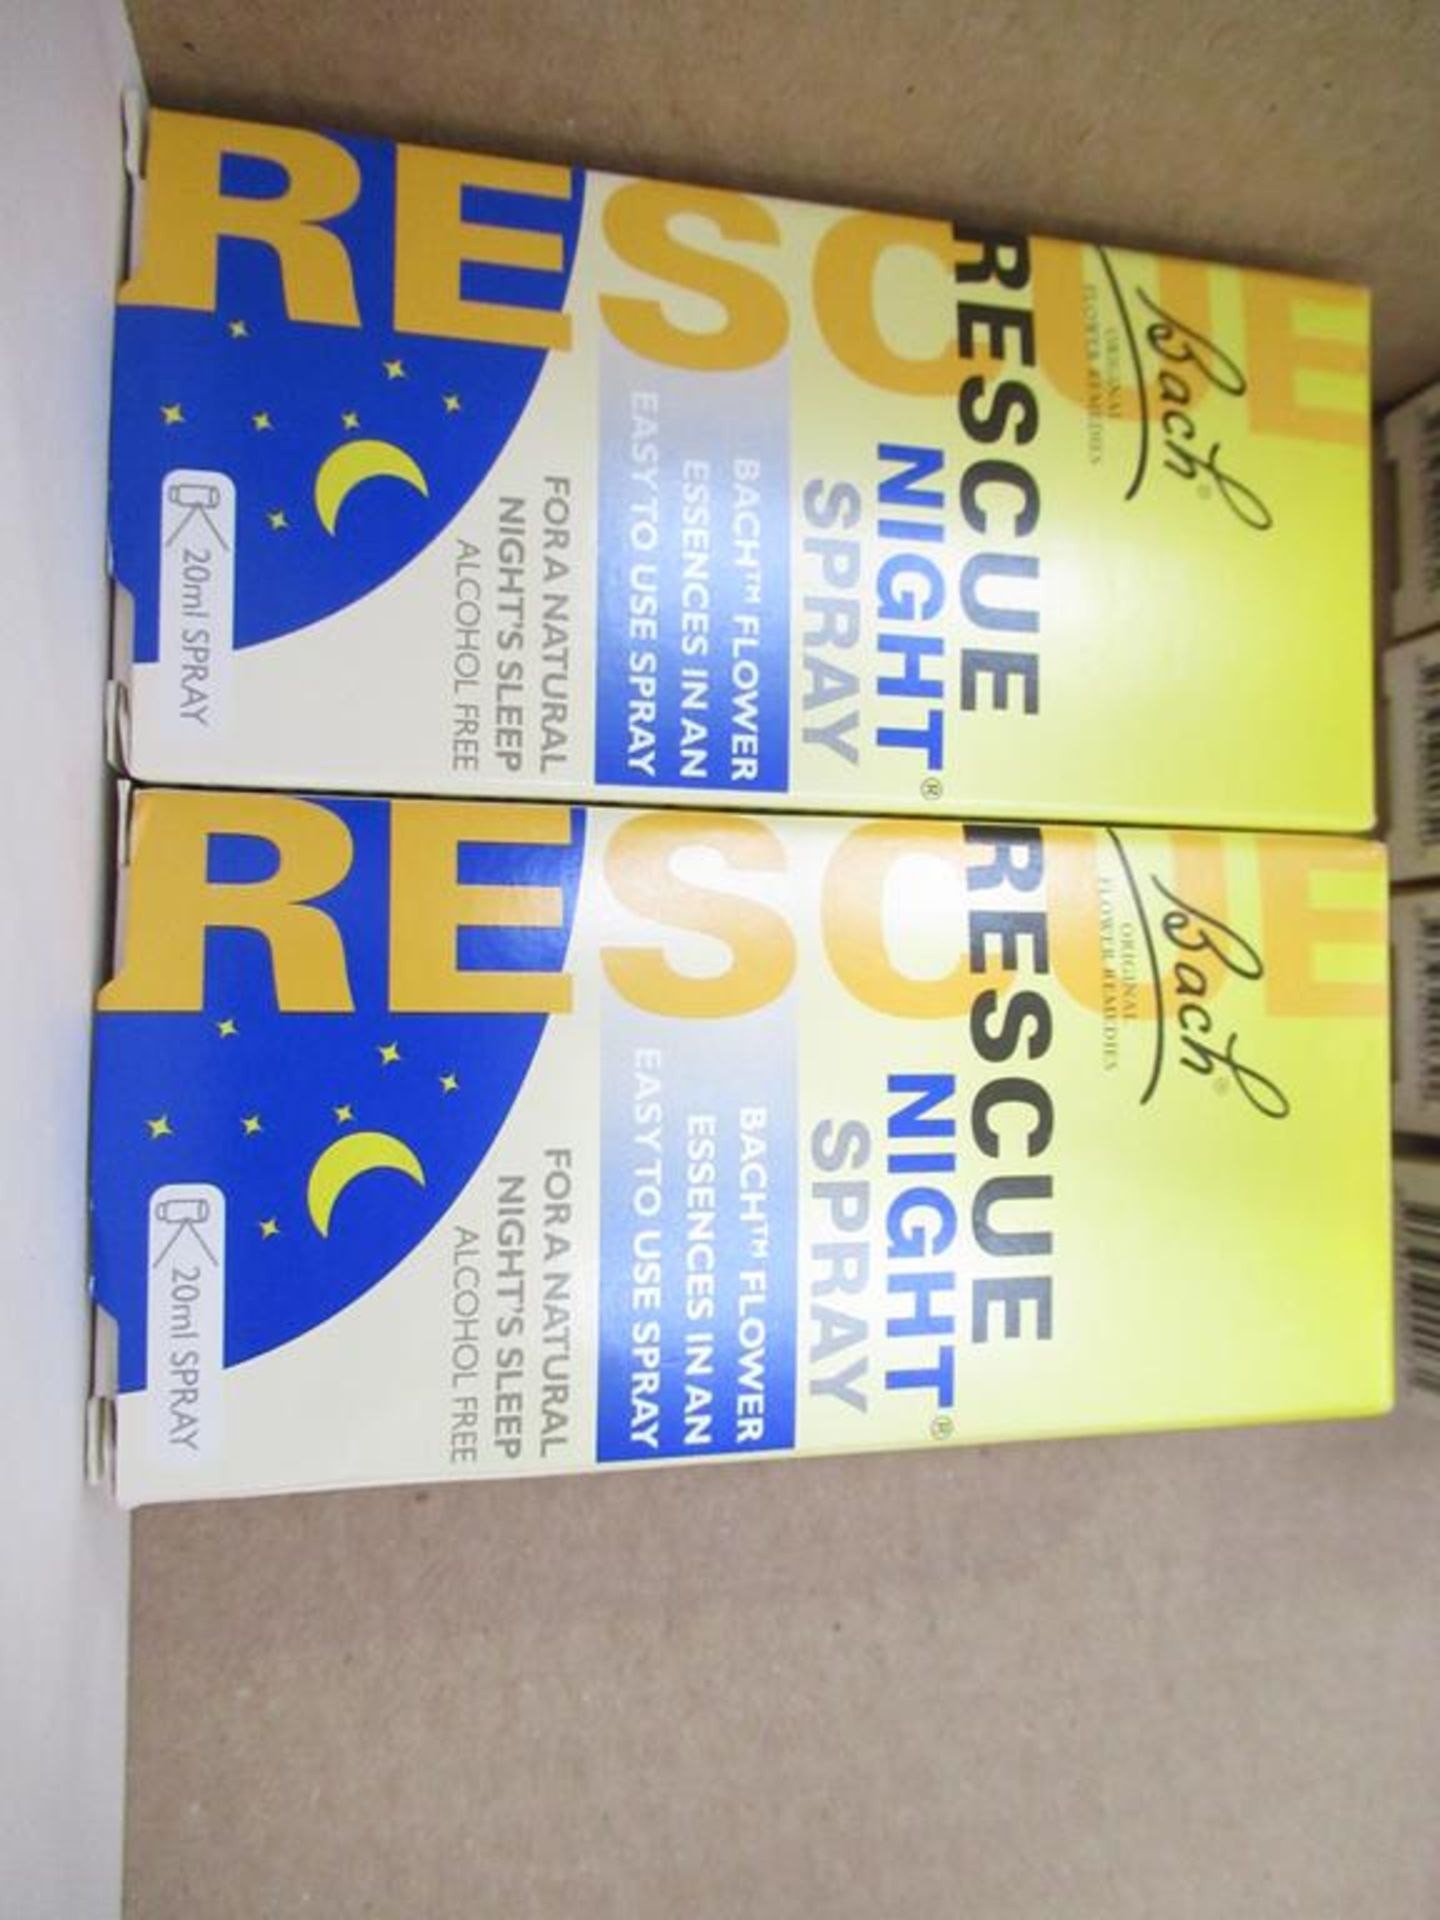 Box of Sleeping Aid Supplements - Image 2 of 5